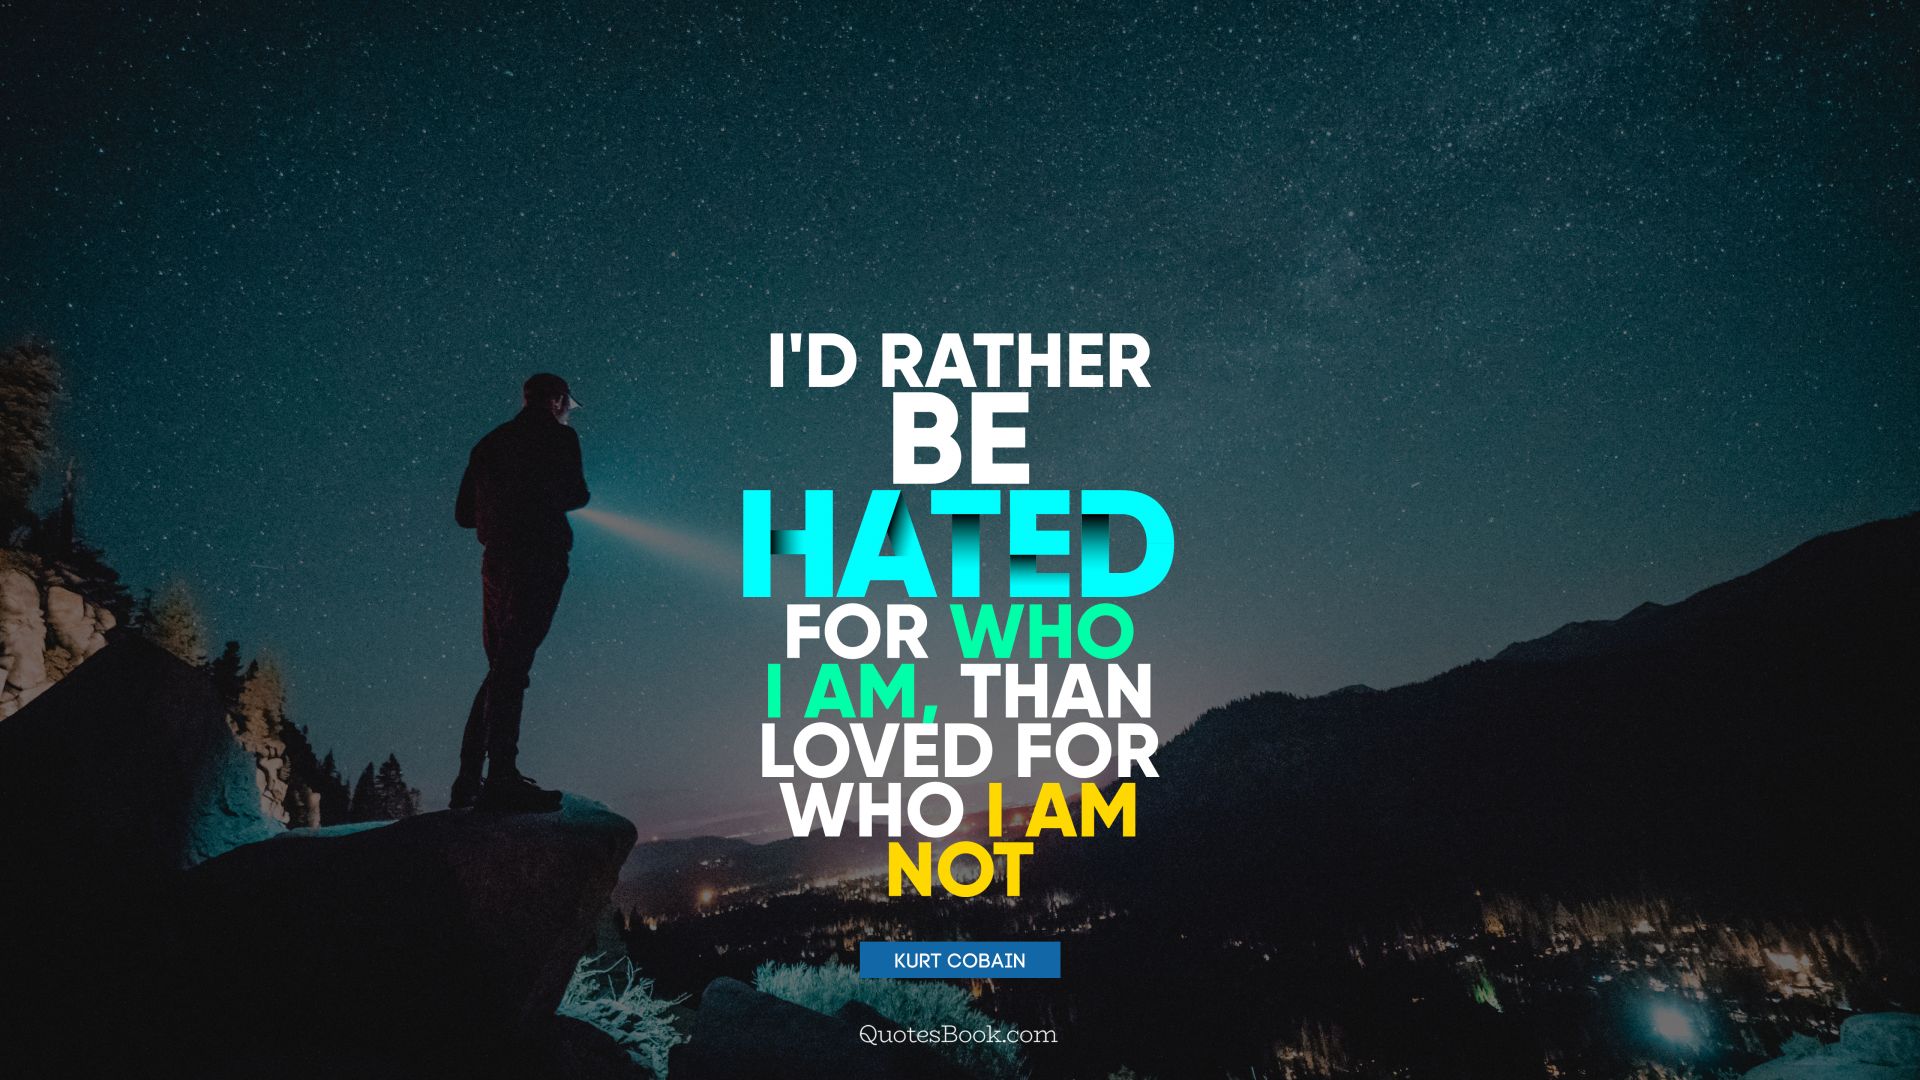 I would rather be hated for who I am, than loved for who I am not. - Quote by Kurt Cobain